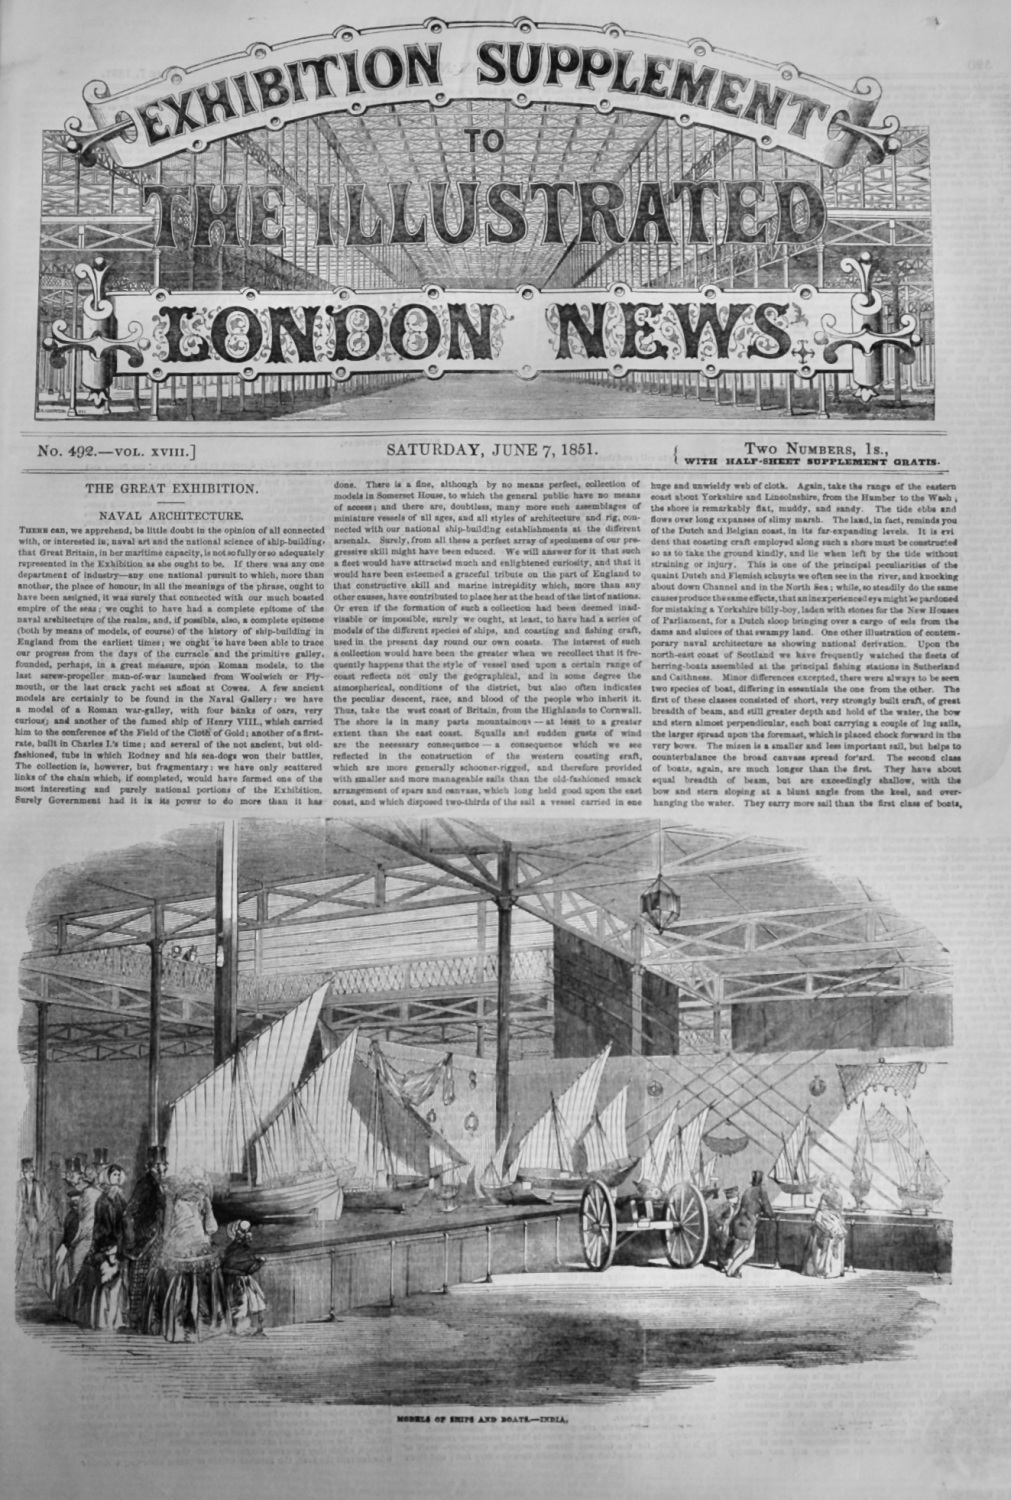 Great Exhibition Supplement to the Illustrated London News, June 7th, 1851.